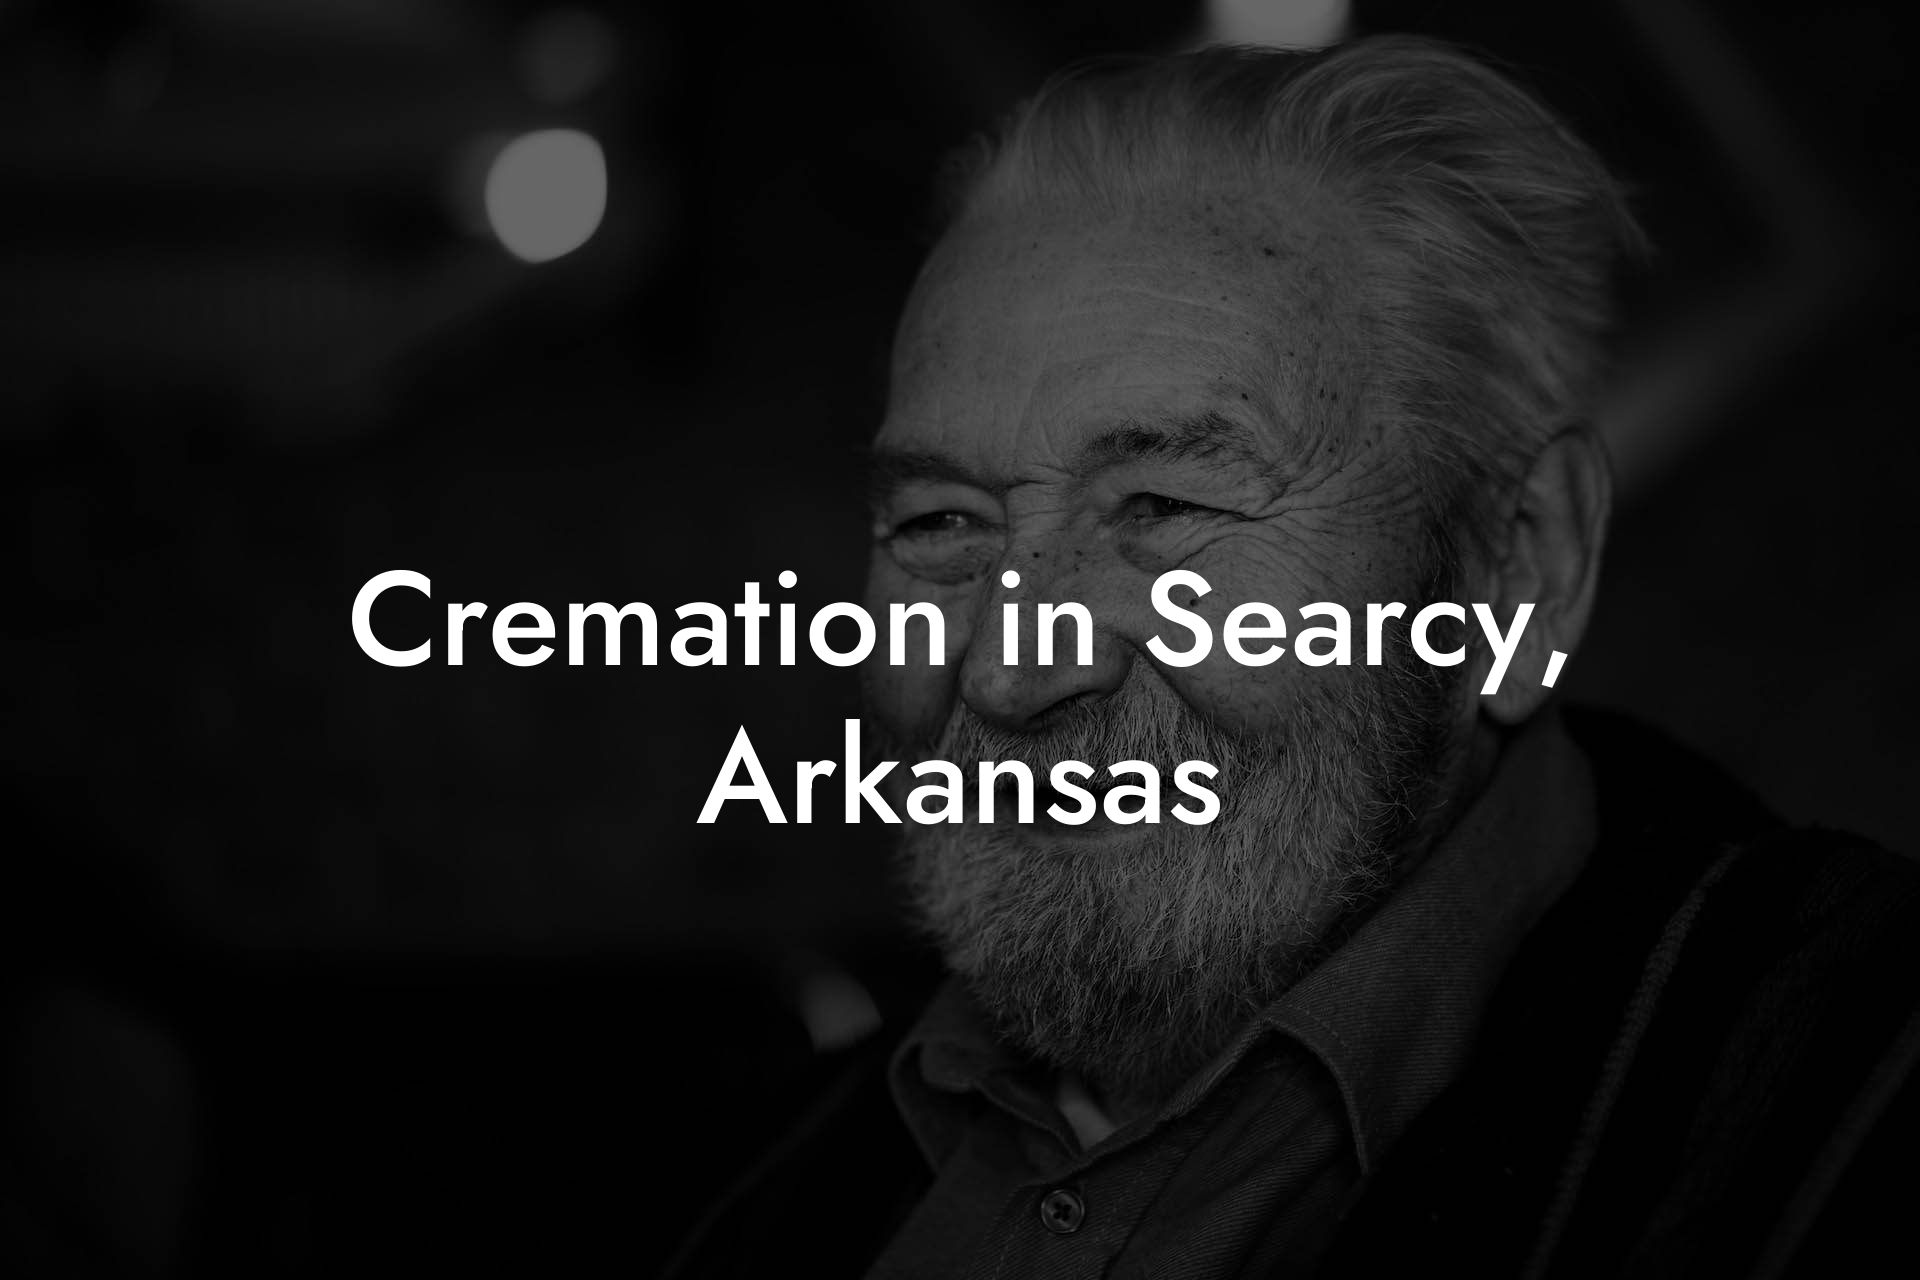 Cremation in Searcy, Arkansas